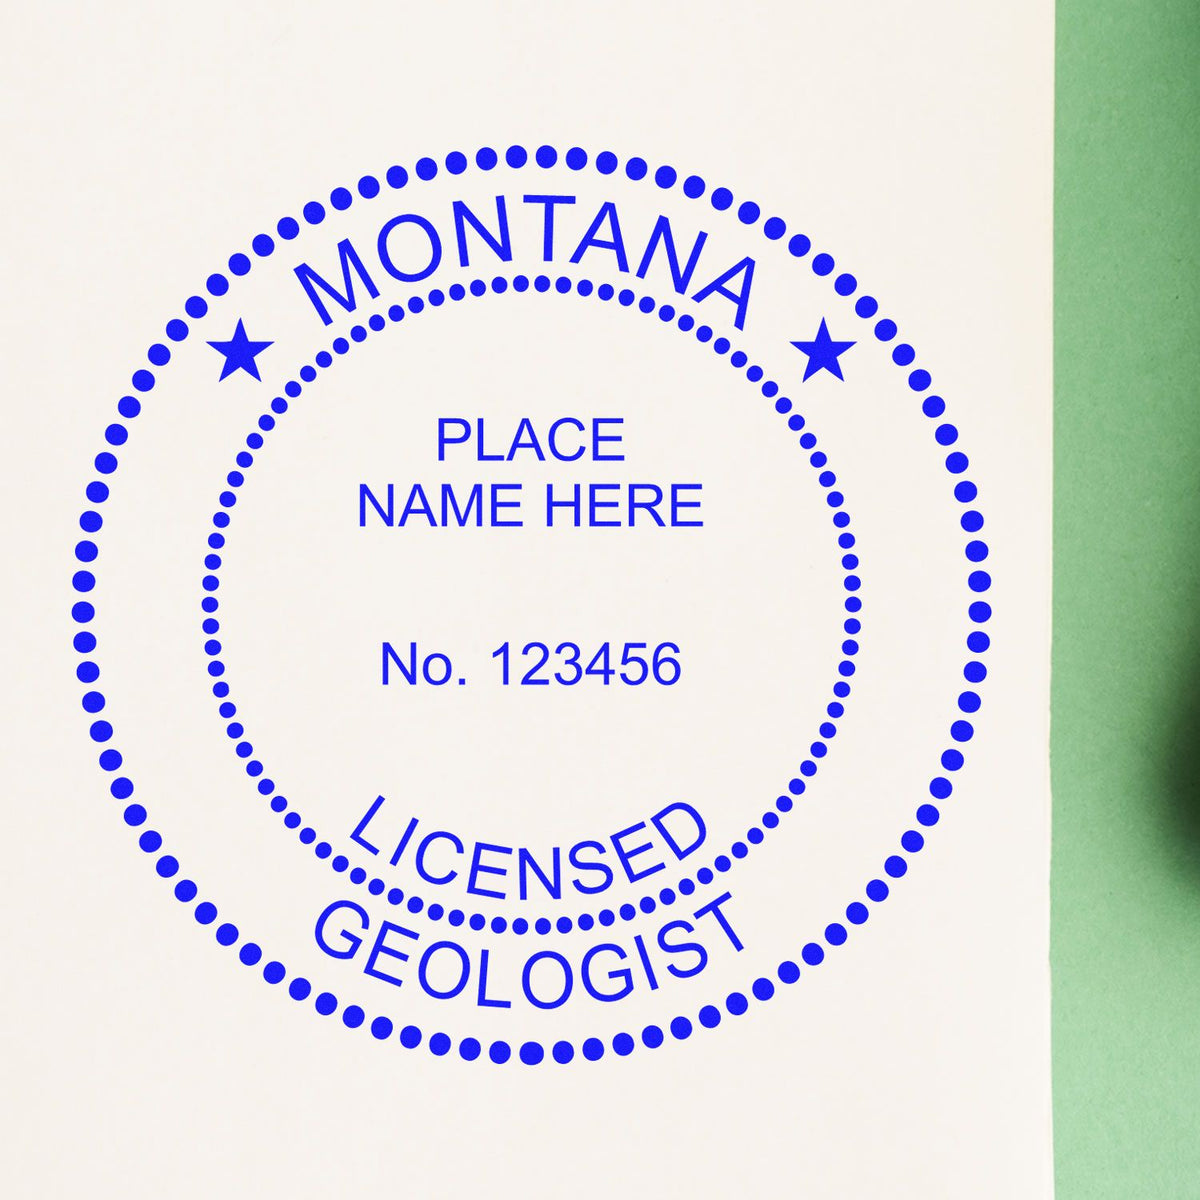 An alternative view of the Slim Pre-Inked Montana Professional Geologist Seal Stamp stamped on a sheet of paper showing the image in use